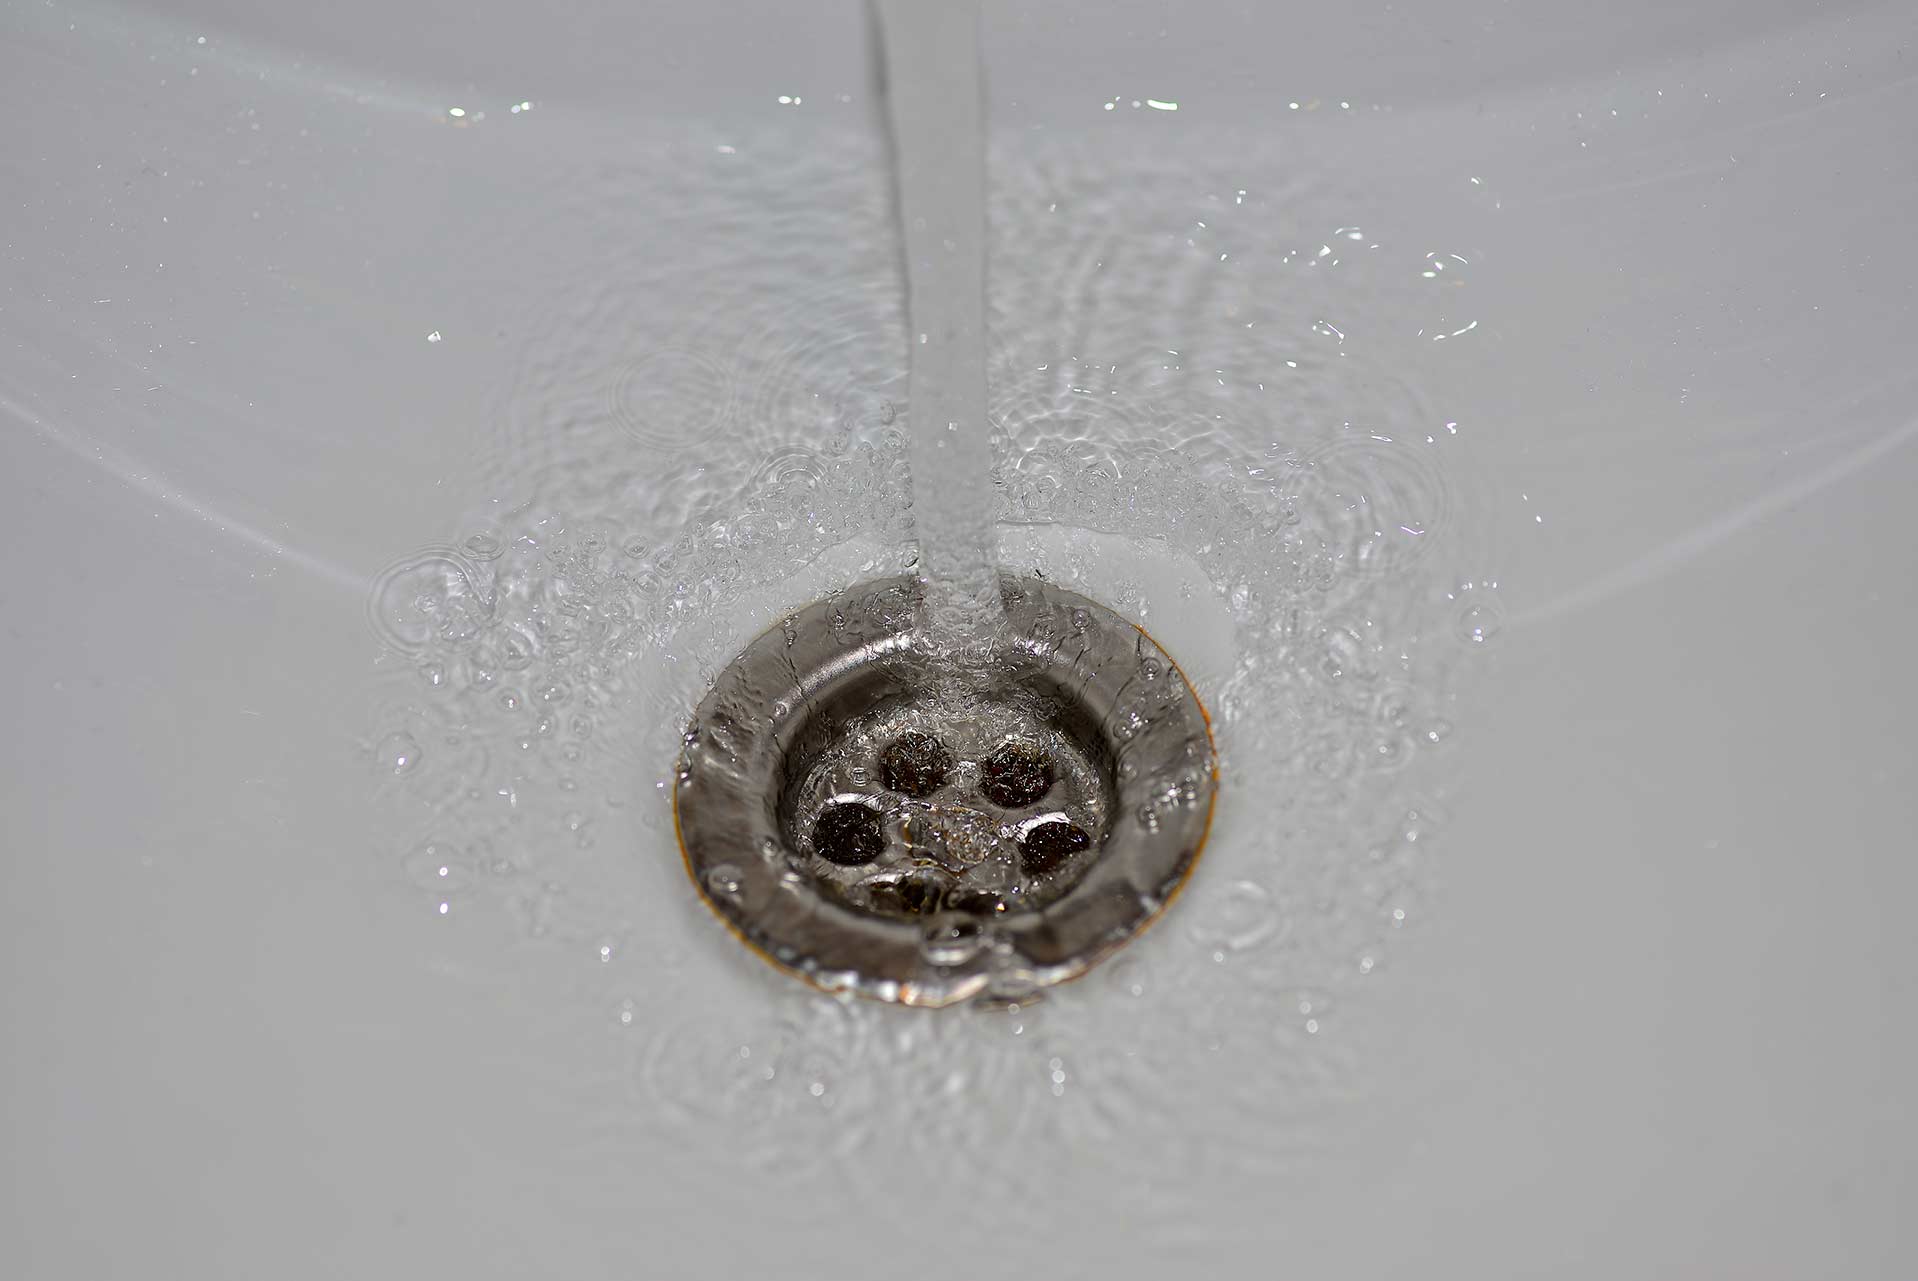 A2B Drains provides services to unblock blocked sinks and drains for properties in Attleborough.